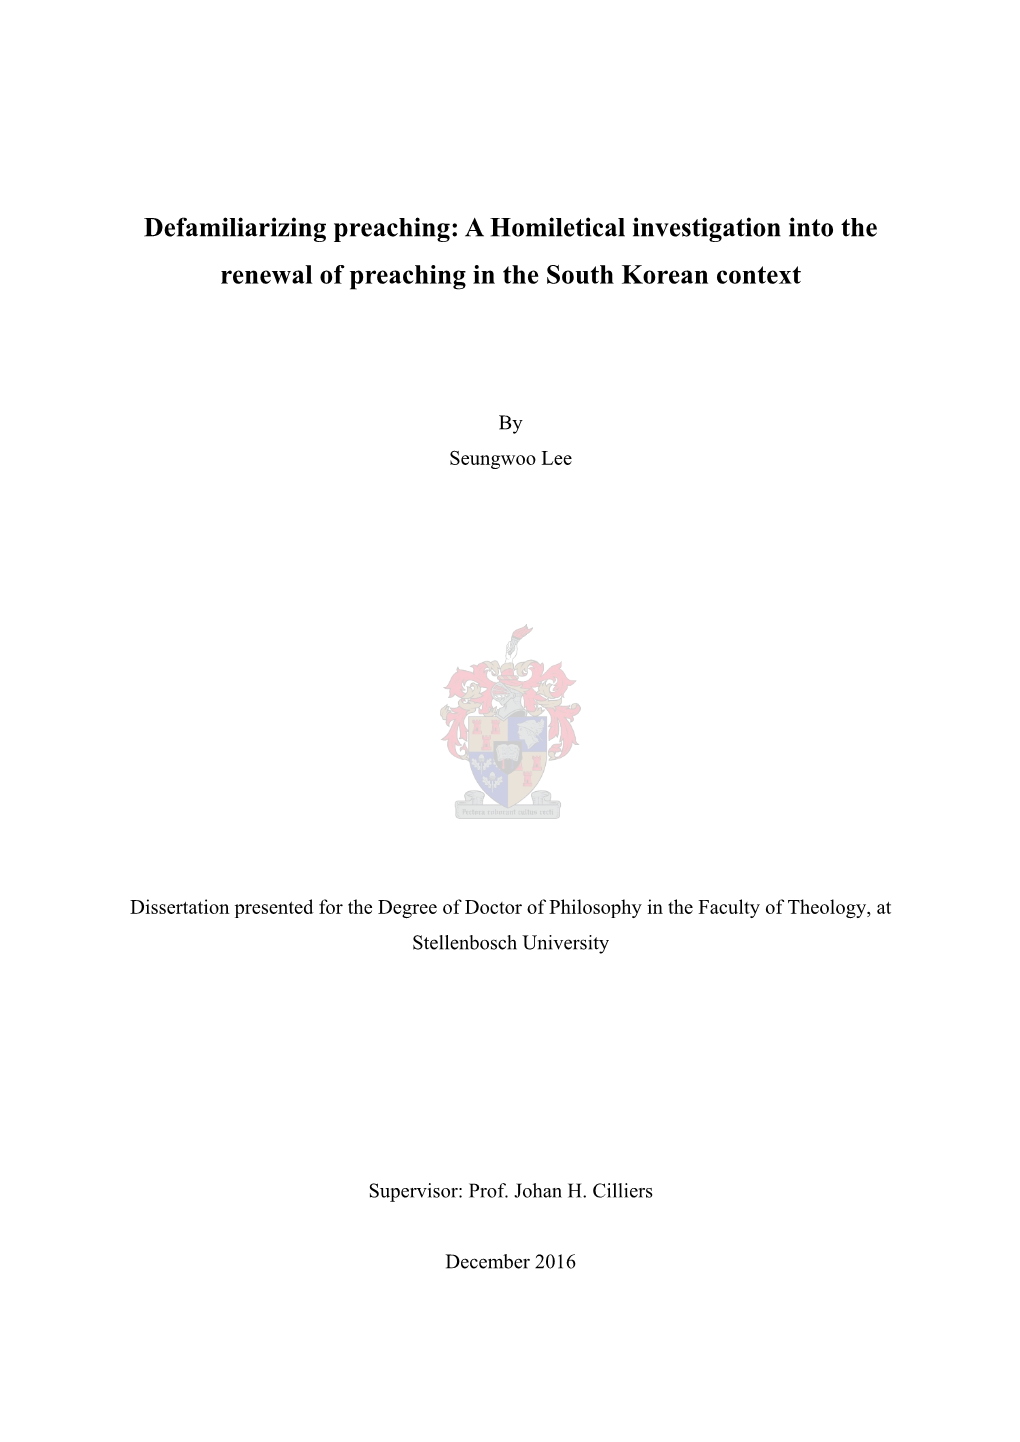 Defamiliarizing Preaching: a Homiletical Investigation Into the Renewal of Preaching in the South Korean Context